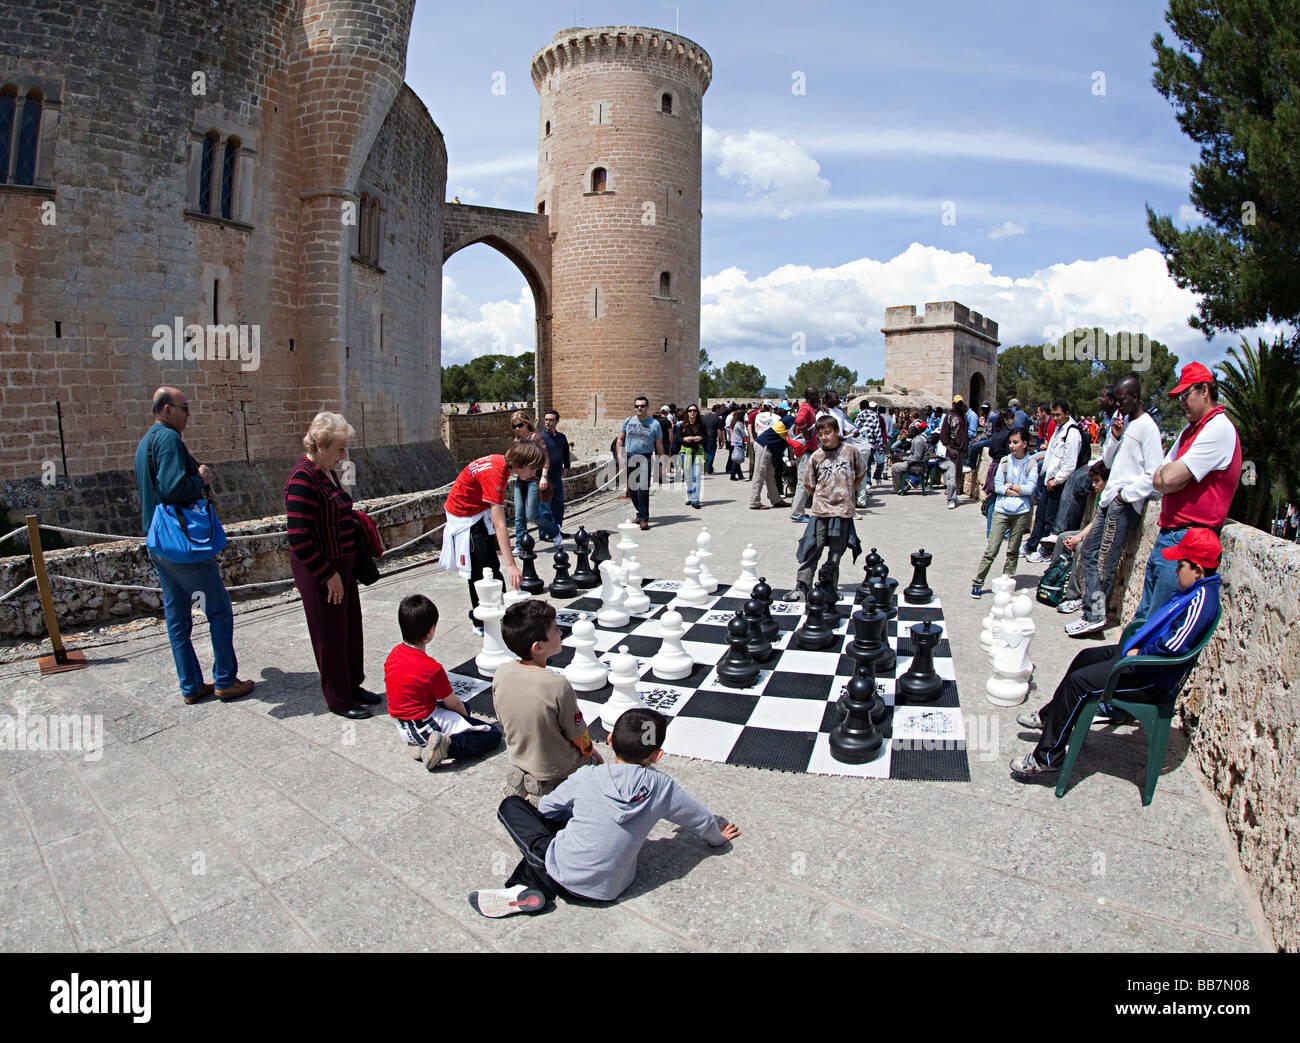 People playing chess in outdoor tournament Bellver Castle Palma